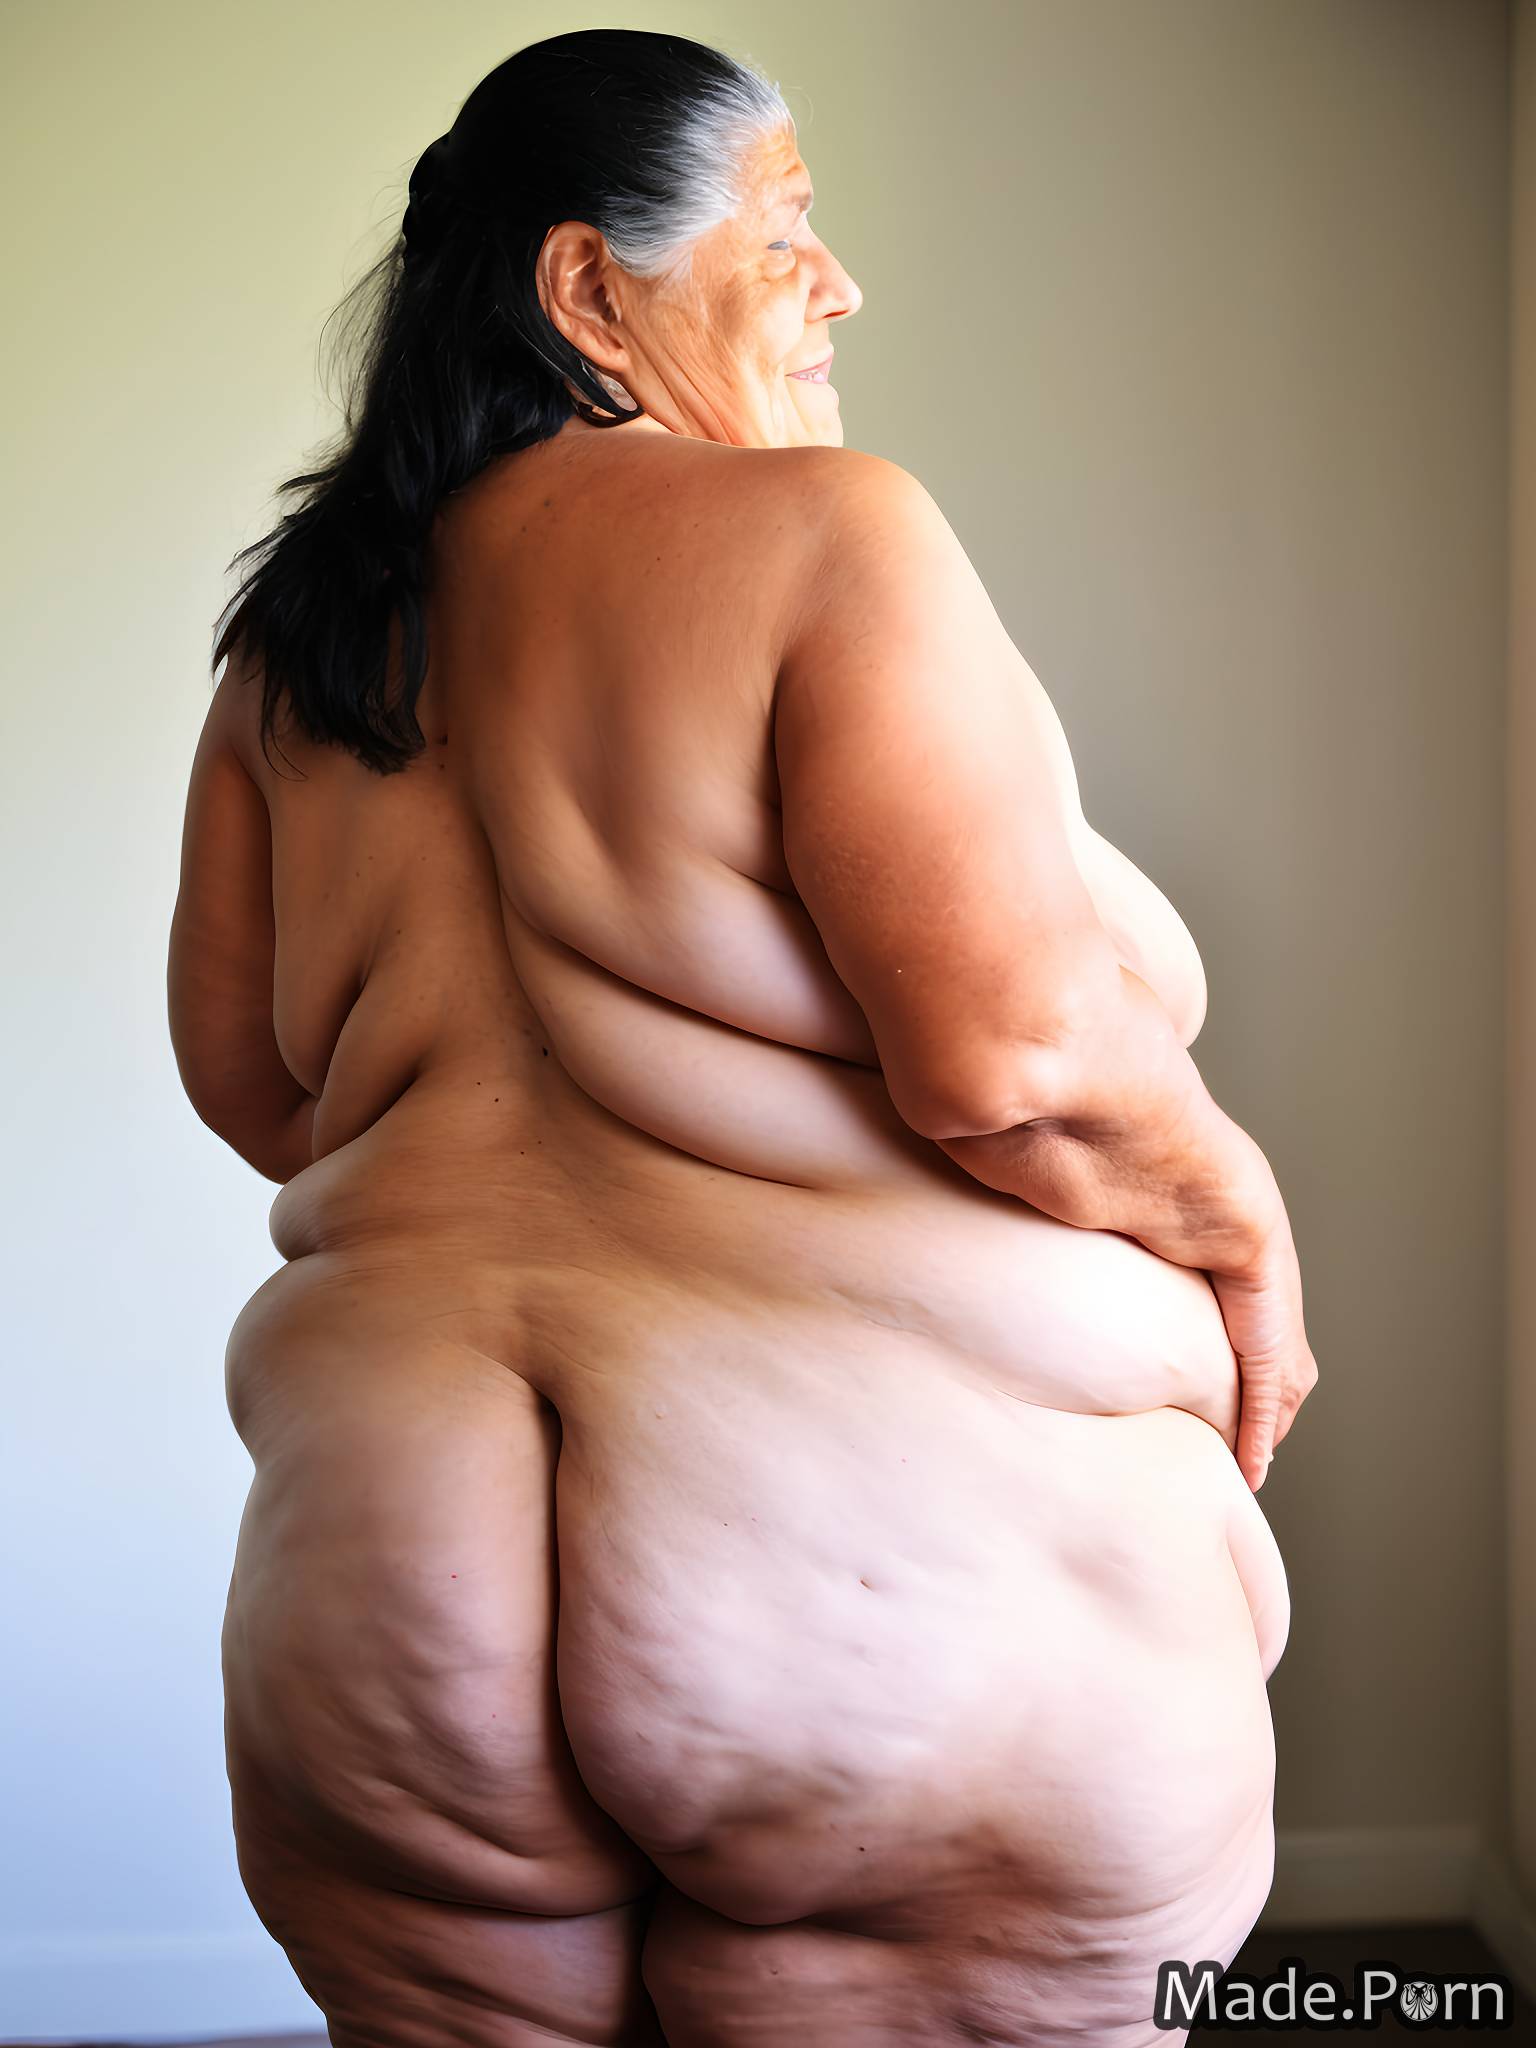 black hair woman tanned skin pawg thick thighs ssbbw sideview